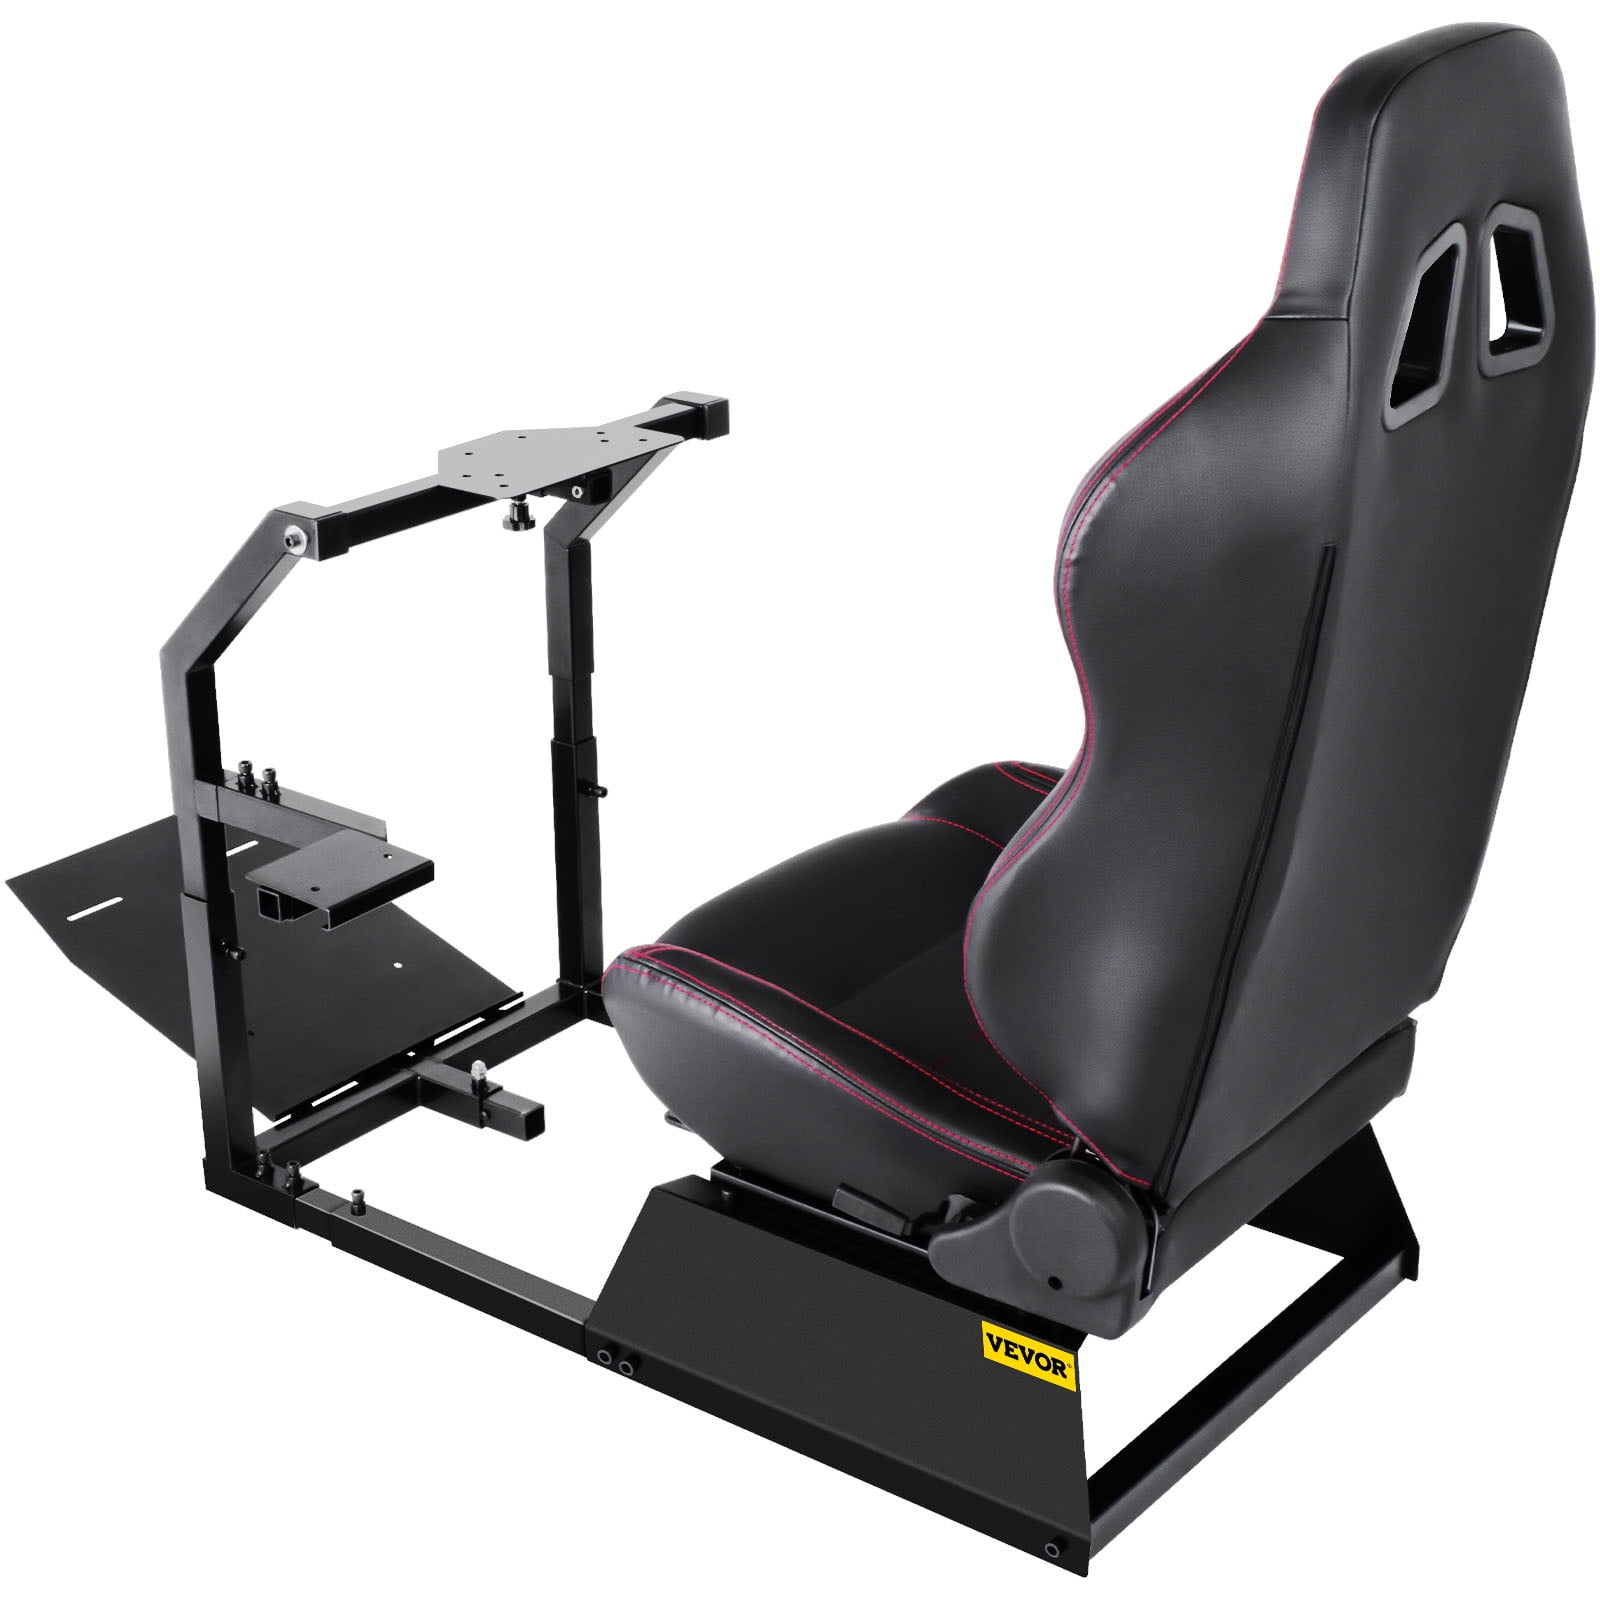  GTPLAYER Racing Simulator Cockpit with Speaker Racing Seat,  Wheel Stand, Pedal and Seat Adjustable, Driving Simulator fit for Logitech  G25G27G29G920, Steering Wheel Shifter Pedals NOT Included : Video Games